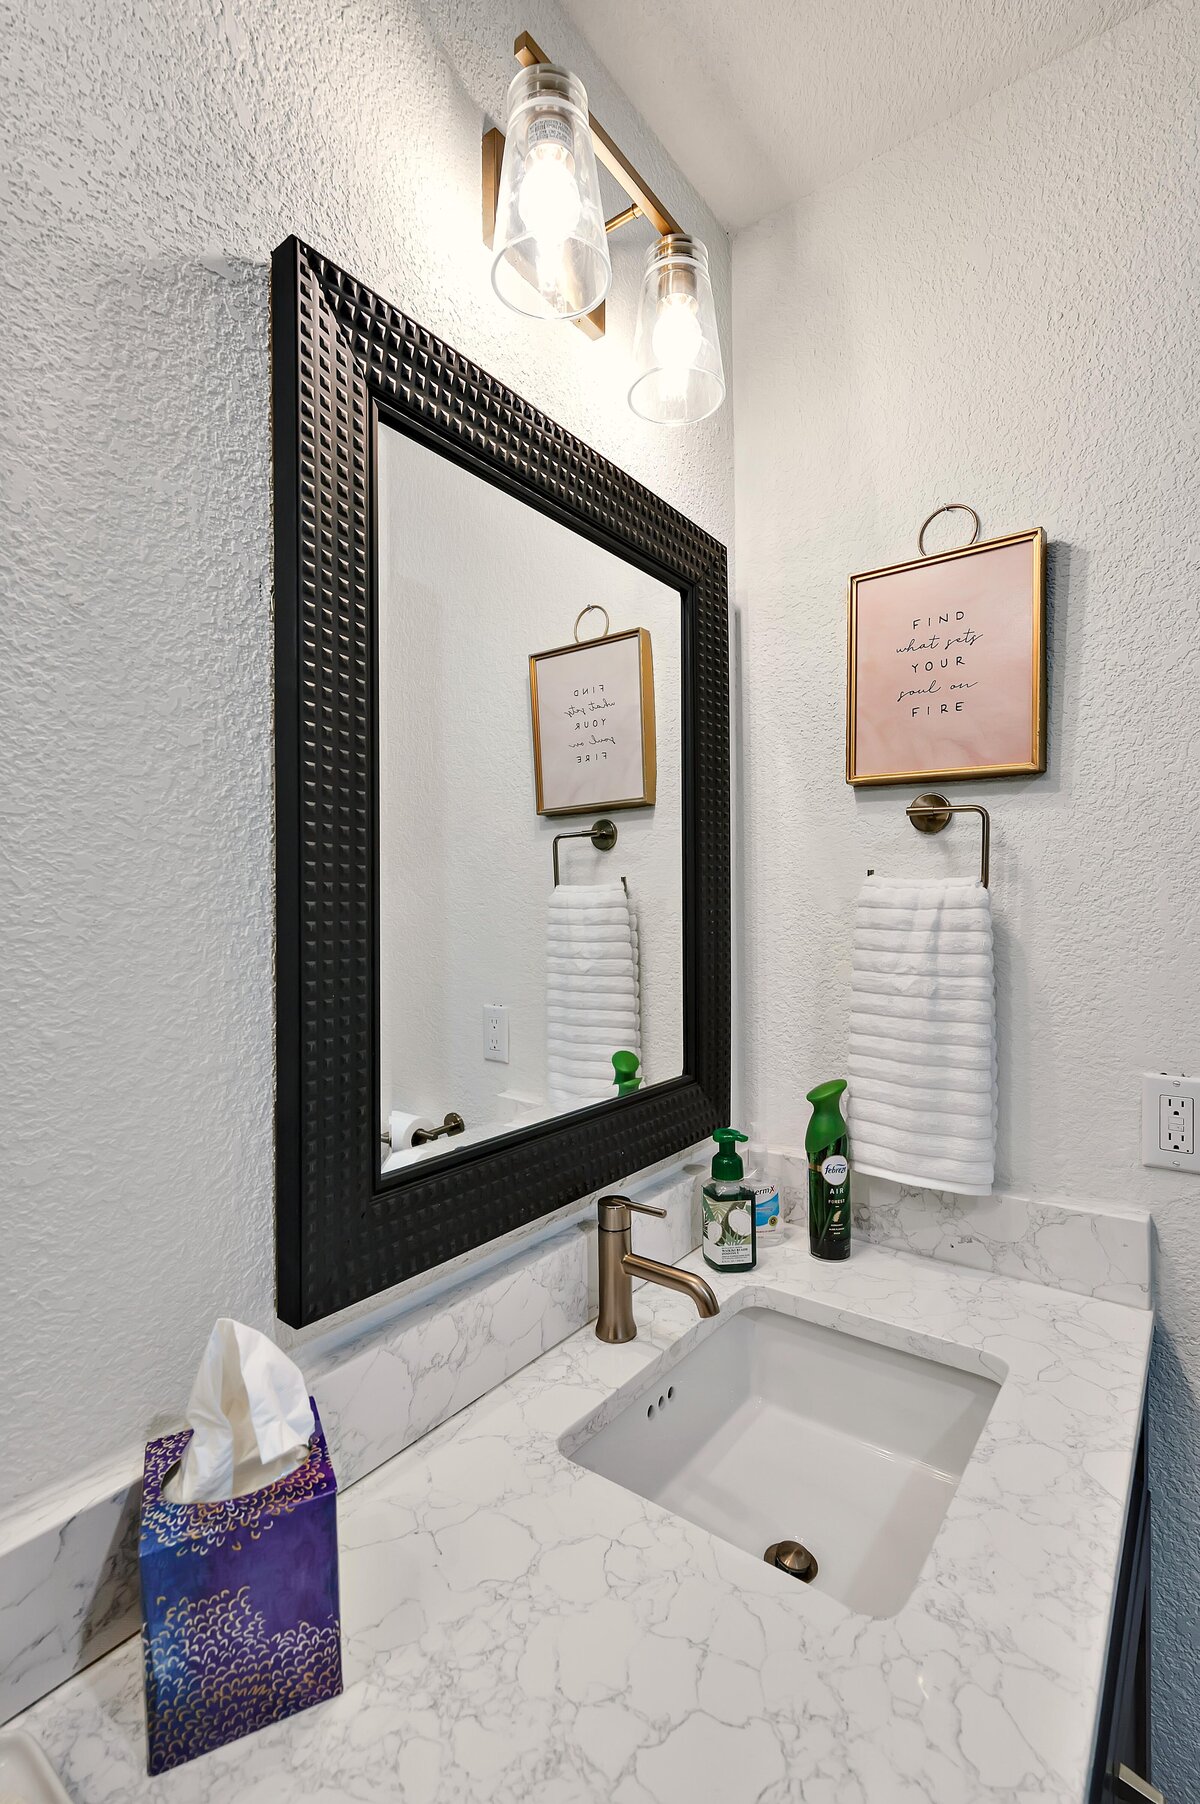 Bathroom vanity in this two-bedroom, two-bathroom vacation rental condo in the historic Behrens building in the heart of the Magnolia Silo District in downtown Waco, TX.